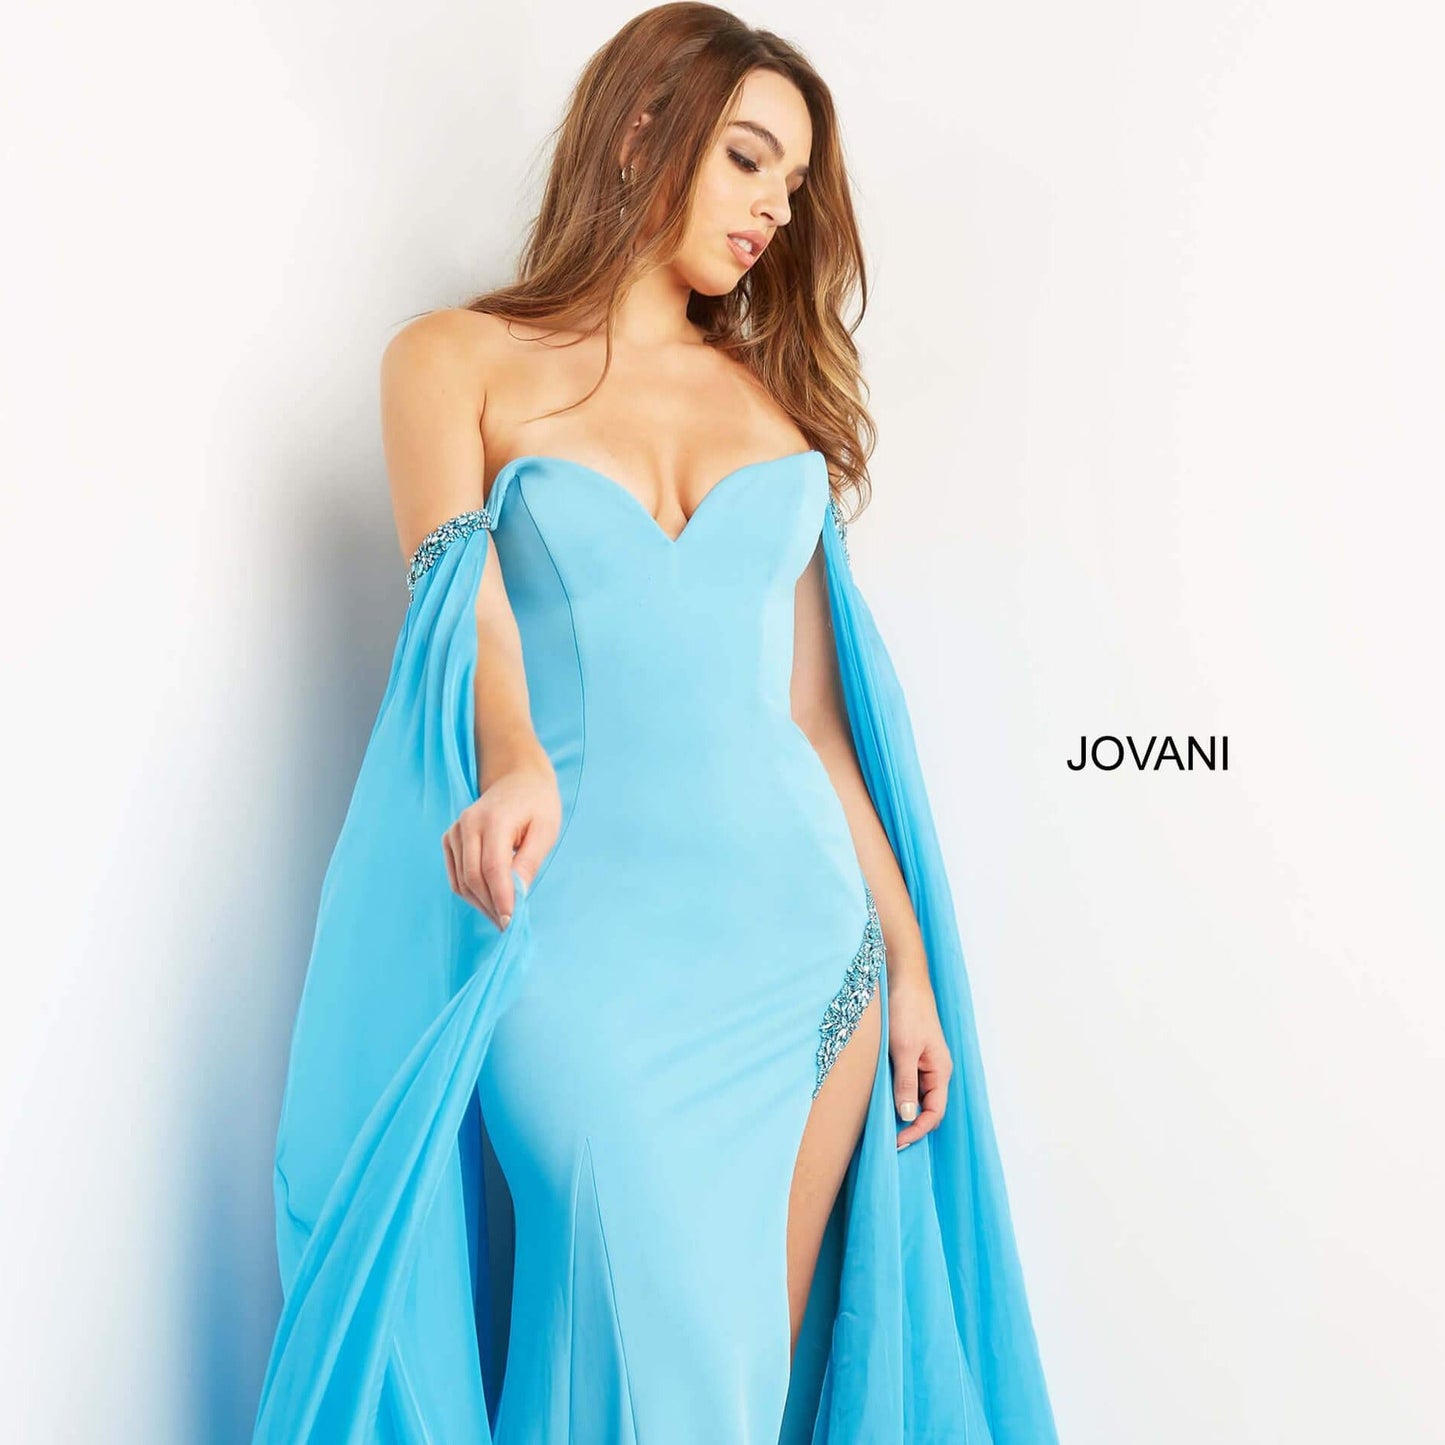 Jovani-07652-turquoise-blue-prom-dress-off-the-shoulder-strapless-flowy-cape-sleeves-fitted-side-slit